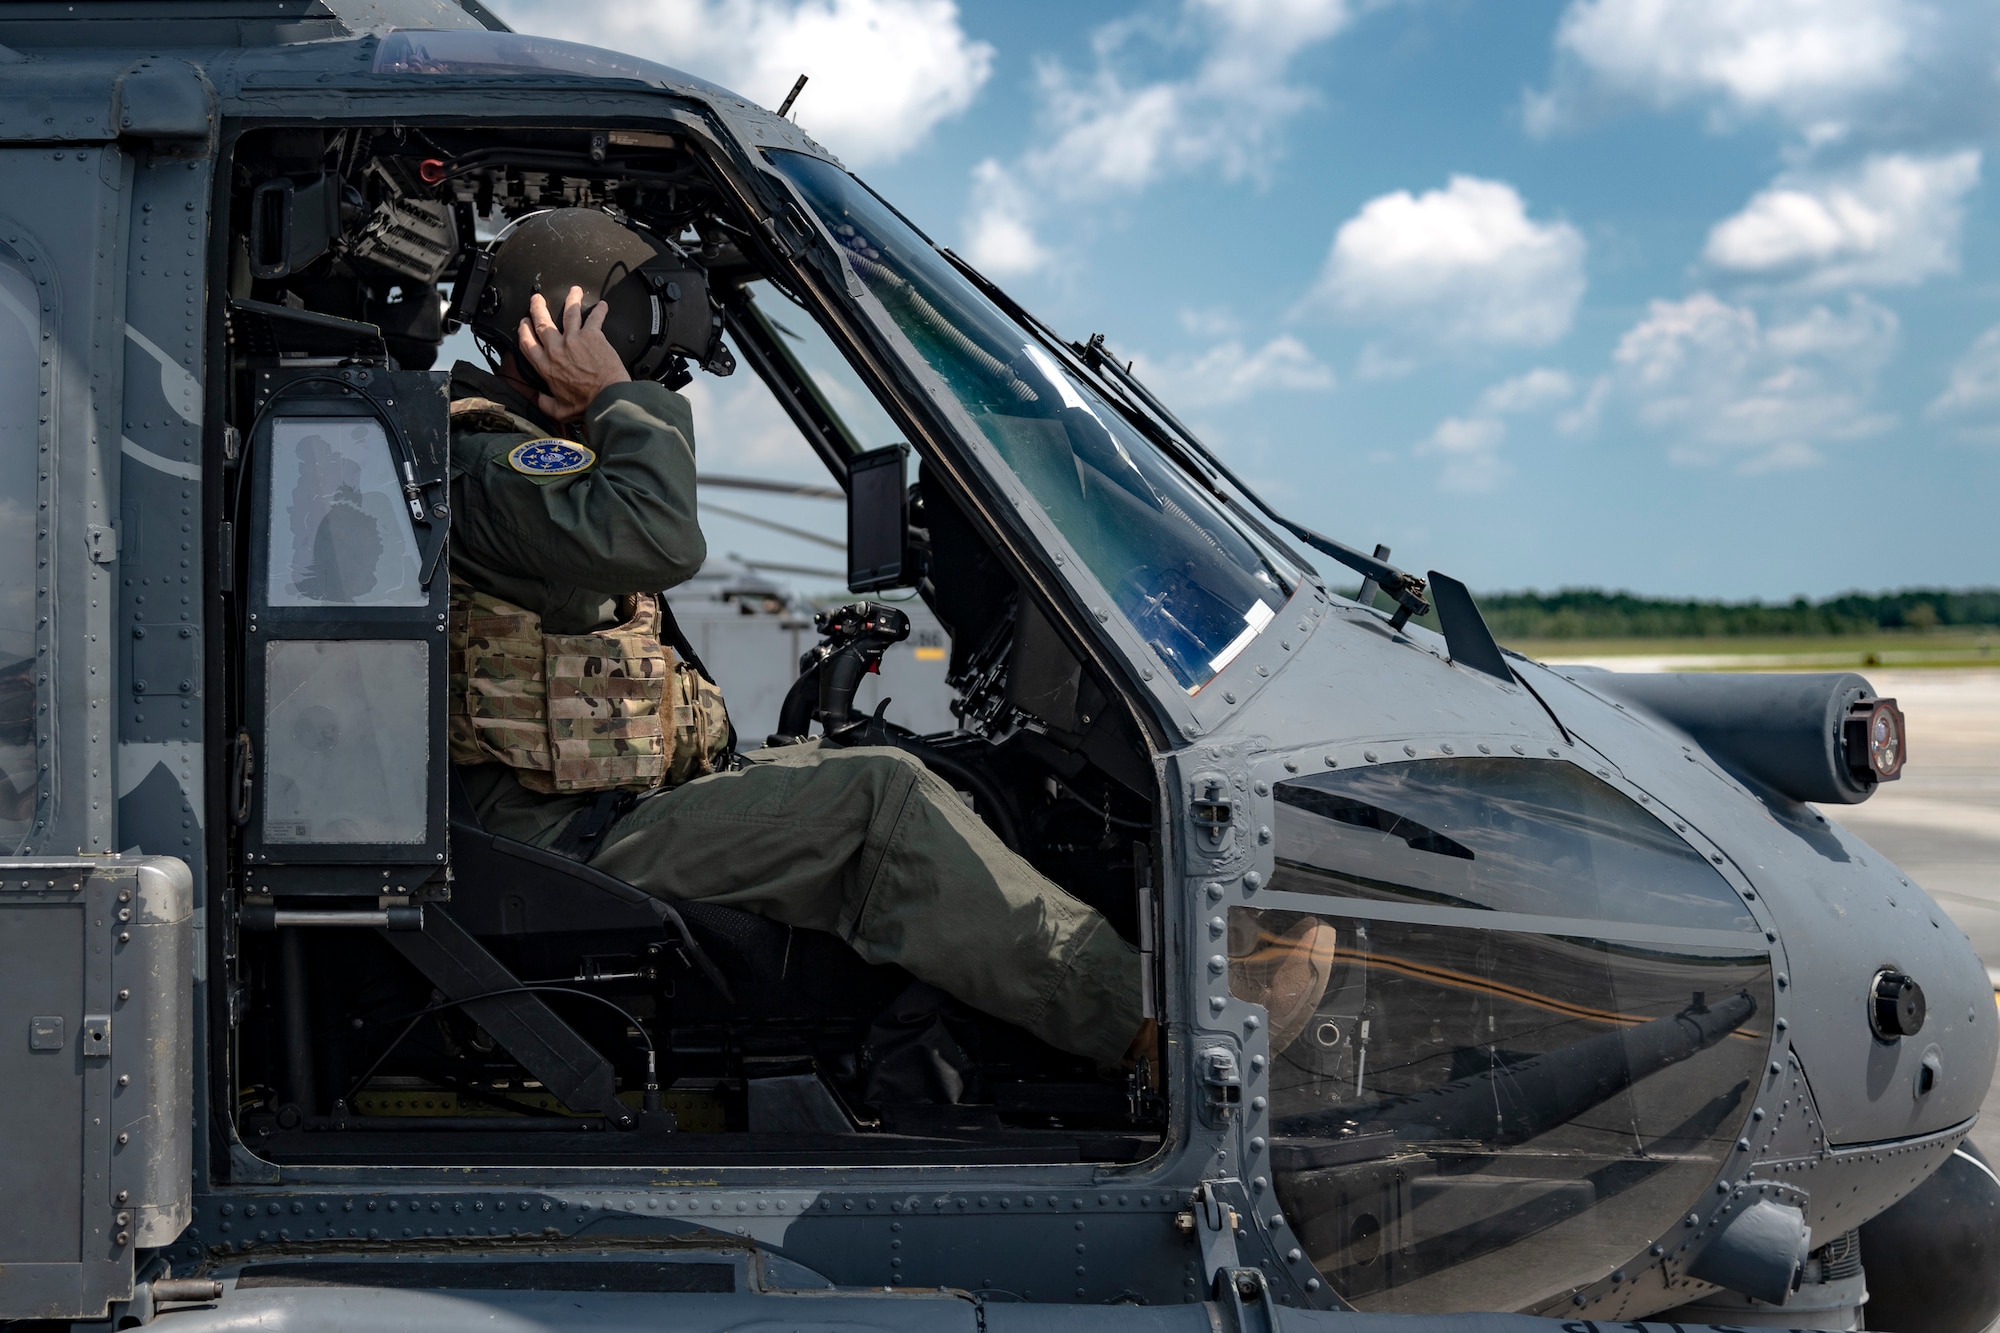 U.S. Air Force Maj. Gen. Chad Franks, Ninth Air Force commander, dons a helmet in an HH-60G Pave Hawk before a flight at Moody Air Force Base, Ga., Aug. 8, 2019. It was Franks’ initial flight in the Ninth Air Force commander’s flagship aircraft, an HH-60G Pave Hawk assigned to the 41st Rescue Squadron. Franks, who on separate occasions served as the commander for the 23d Wing and 347th Rescue Group, is a command pilot with more than 3,300 hours in multiple aircraft including HC-130J Combat King II and HH-60G Pave Hawk. (U.S. Air Force photo by Airman 1st Class Taryn Butler)